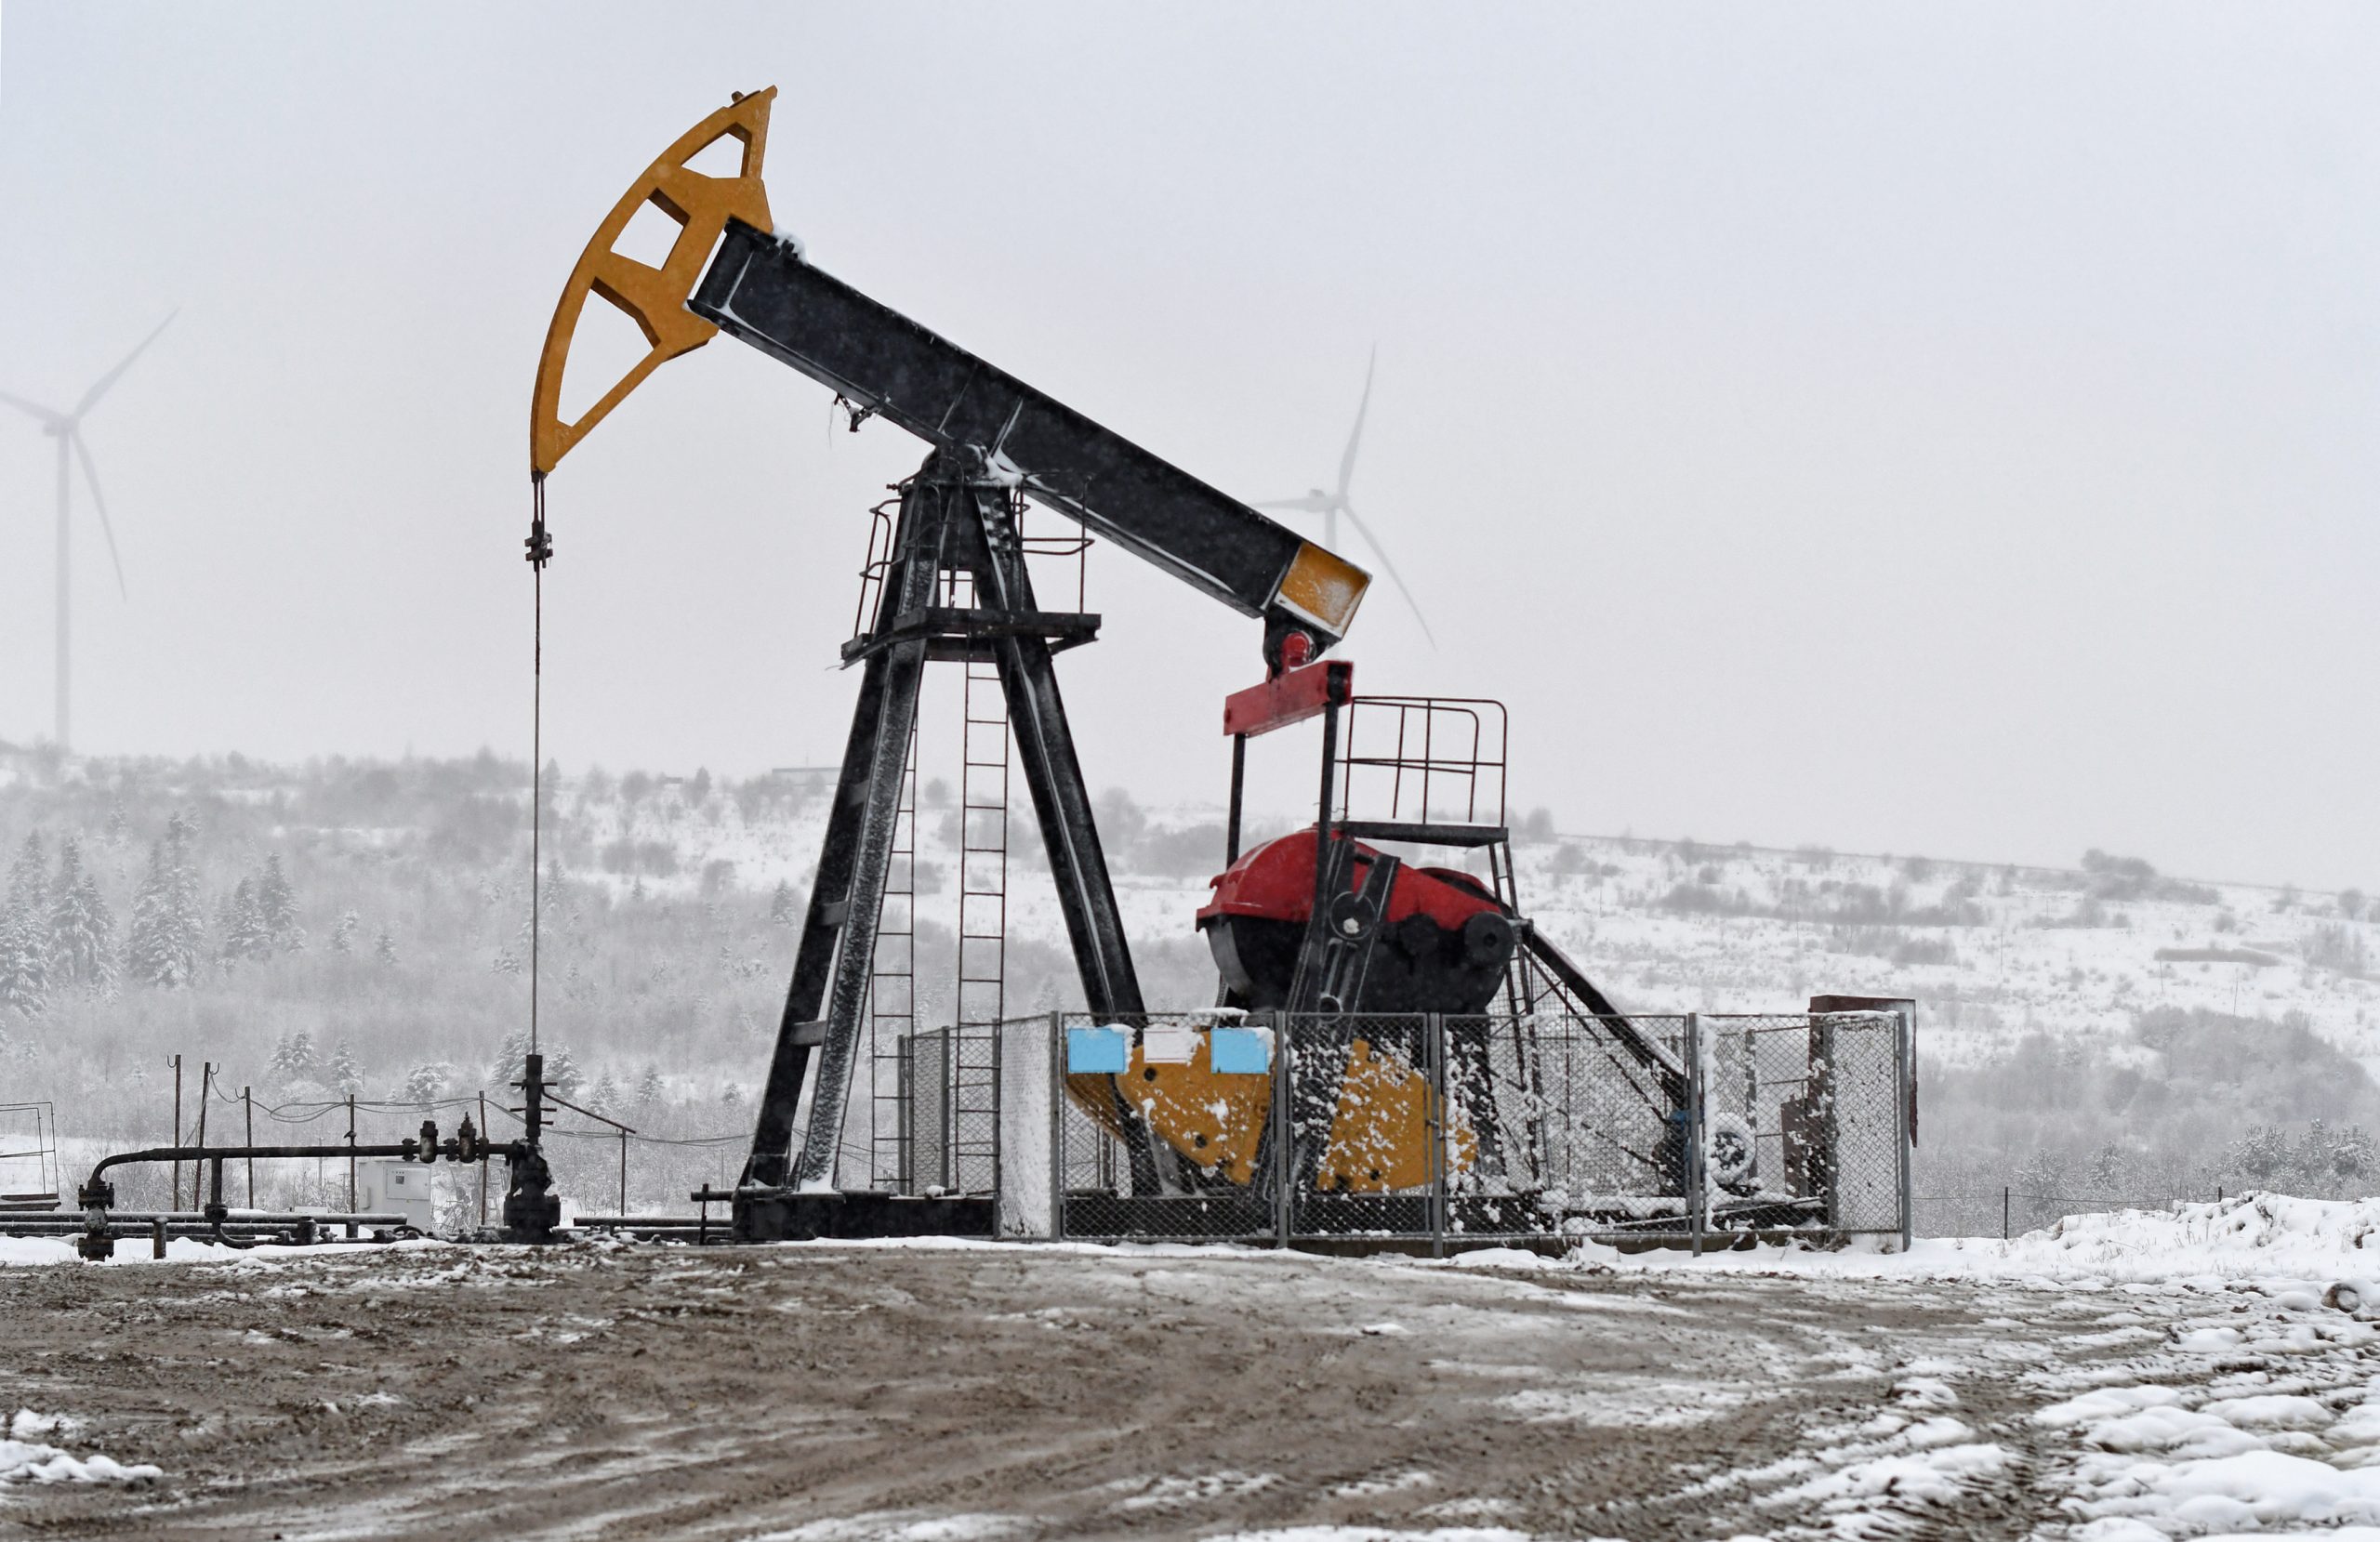 Oil pump. Oil and gas industry equipment. Oil field pump jack and oil refinery in the winter with snow, wind turbine mountains and forest in background